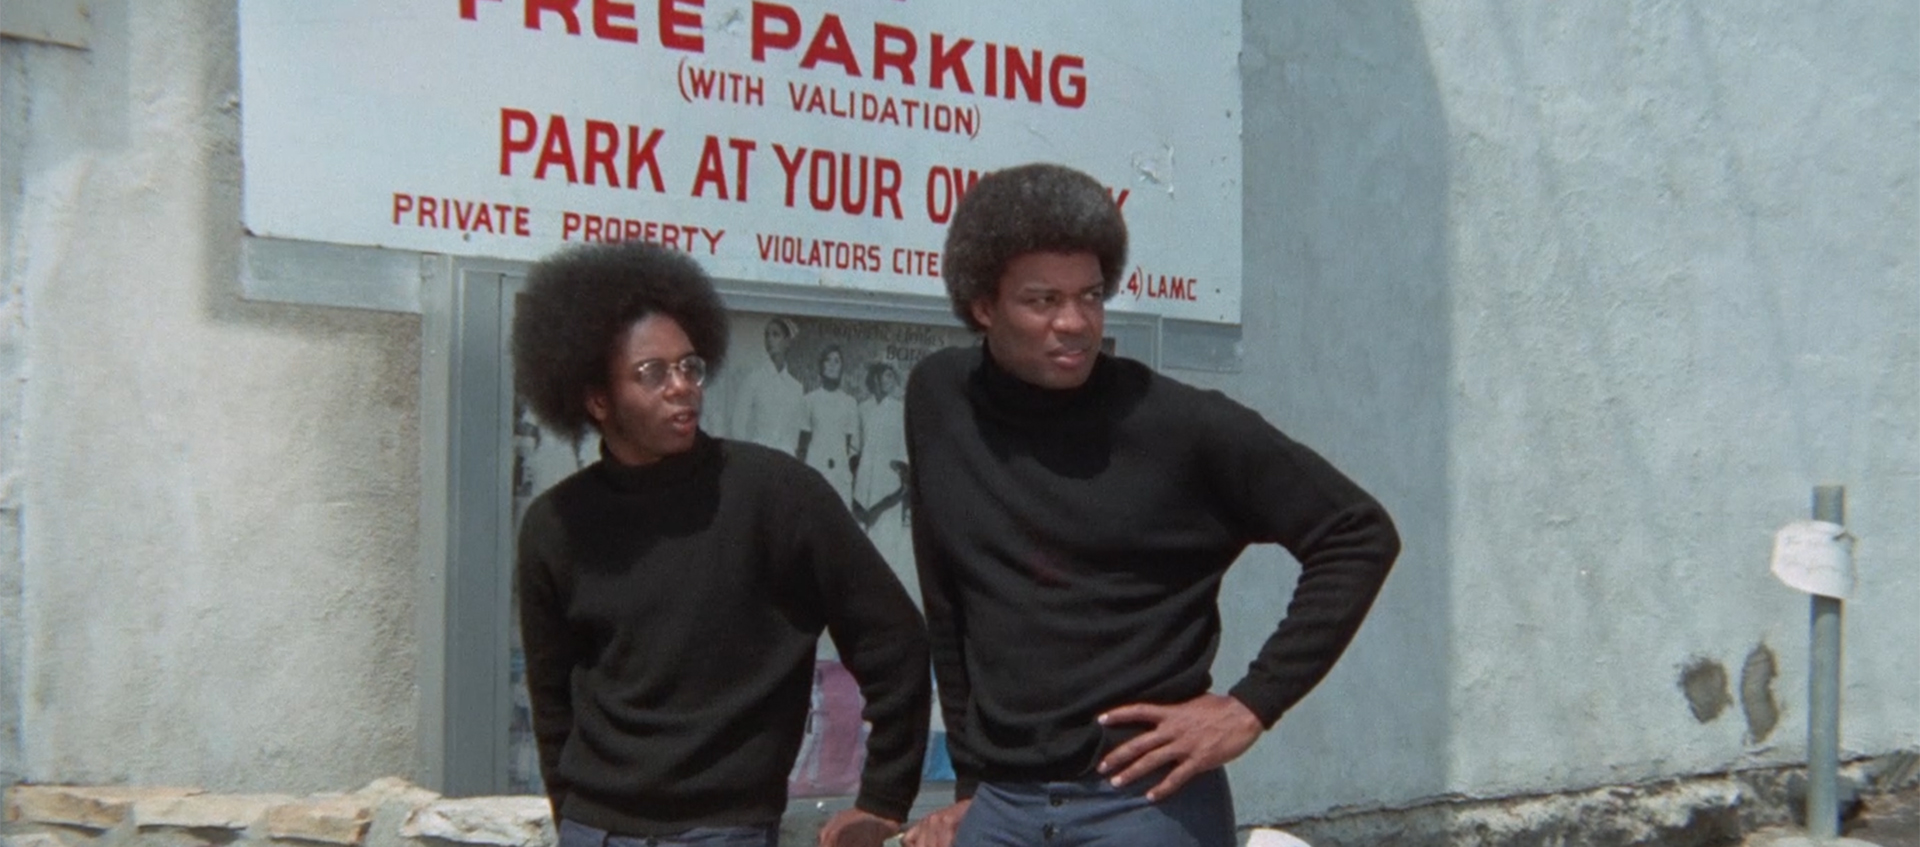 Two Black men stand in front of a parking lot sign, looking to the right, and wear black, long-sleeved turtlenecks and their hair in afros.